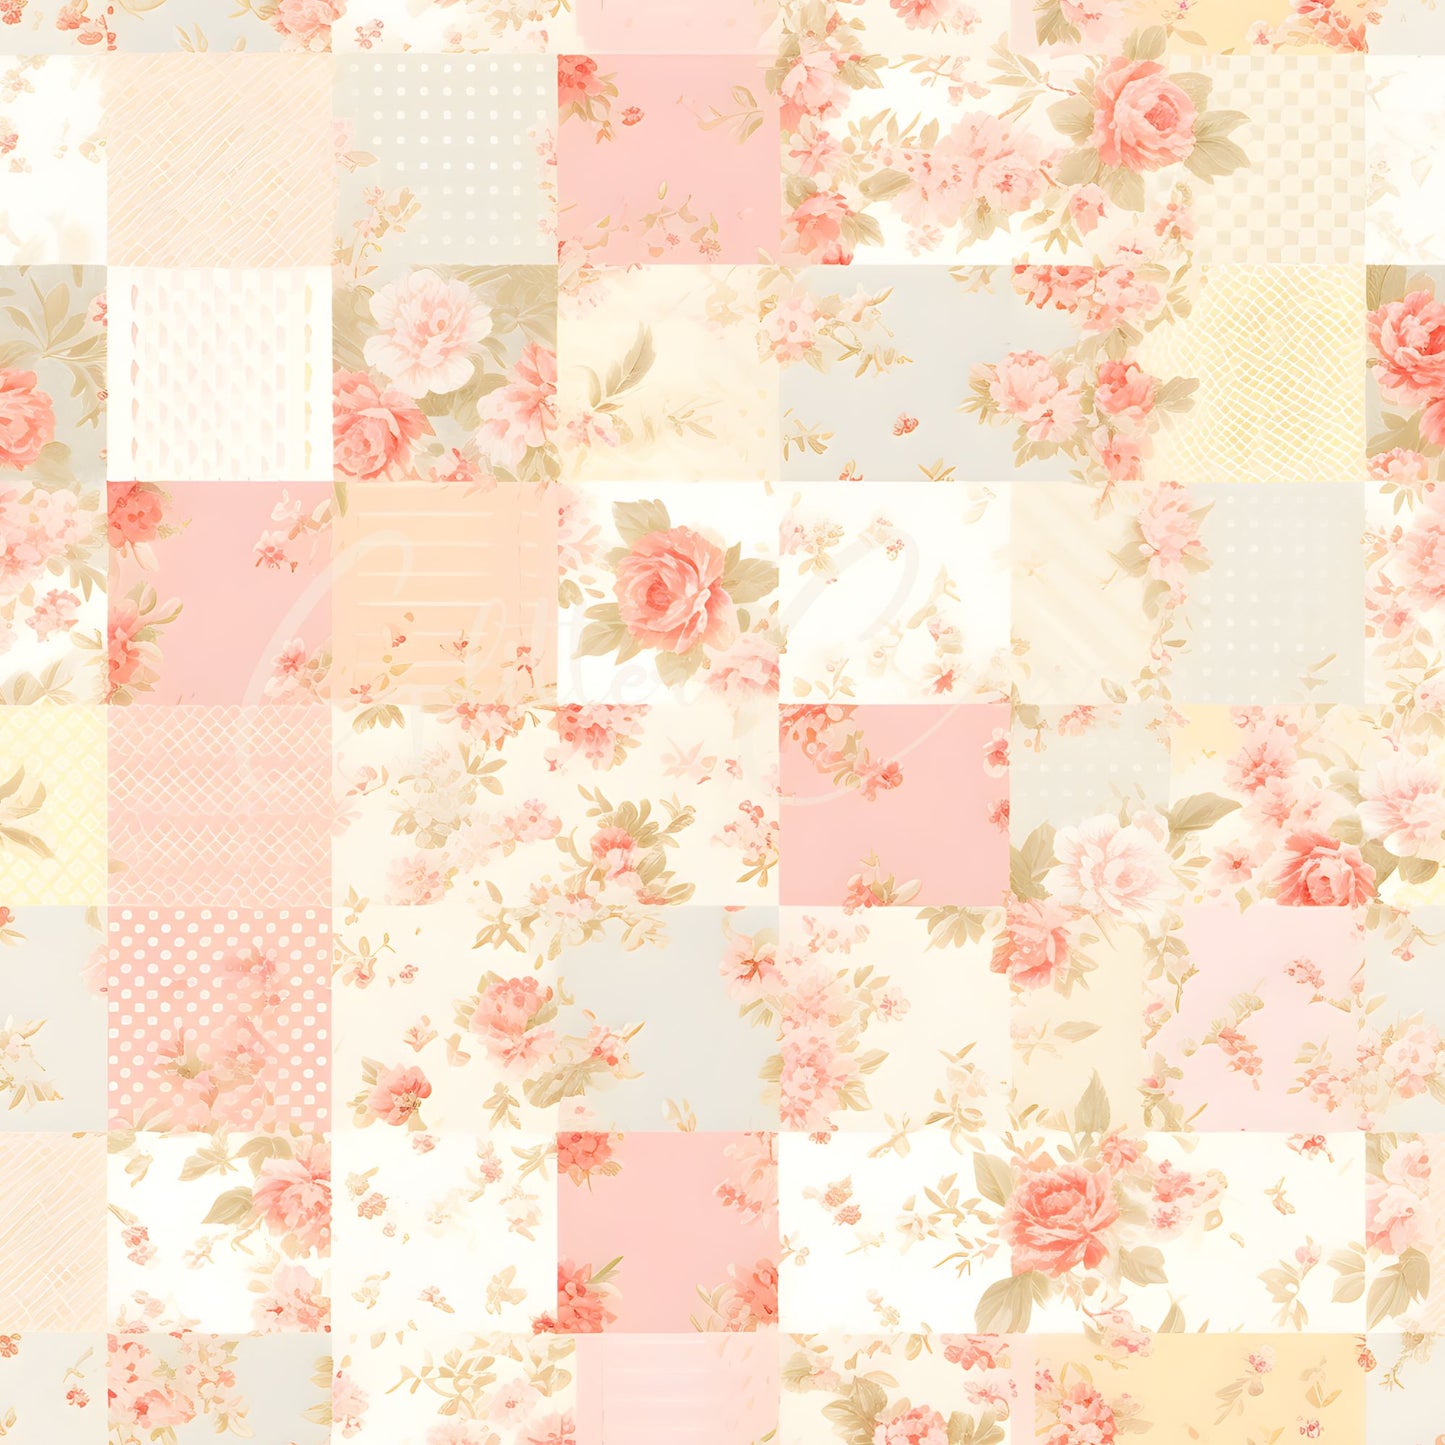 Shabby Chic Vinyl Collection- 24 Design options